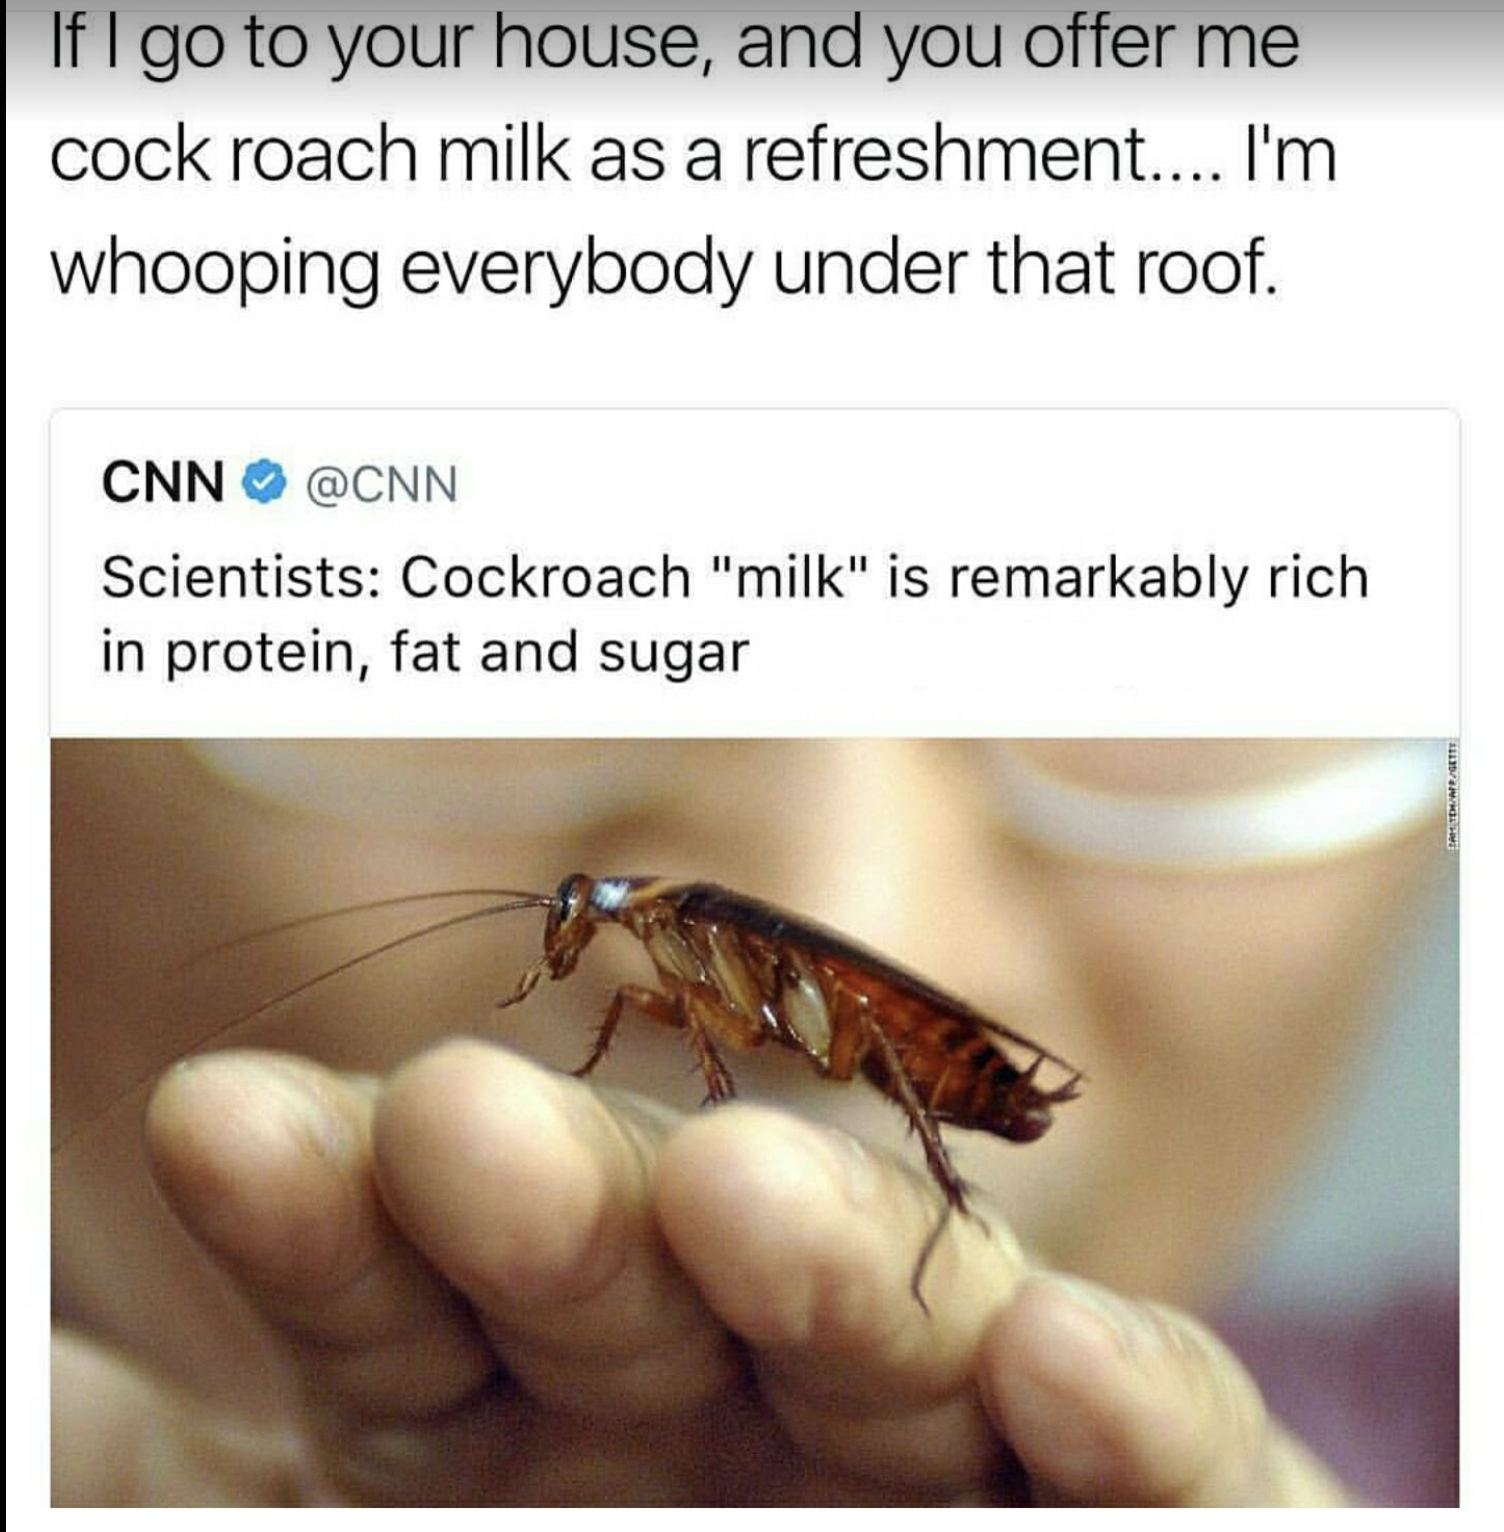 cockroach taste meme - If I go to your house, and you offer me cock roach milk as a refreshment.... I'm whooping everybody under that roof. Cnn Scientists Cockroach "milk" is remarkably rich in protein, fat and sugar